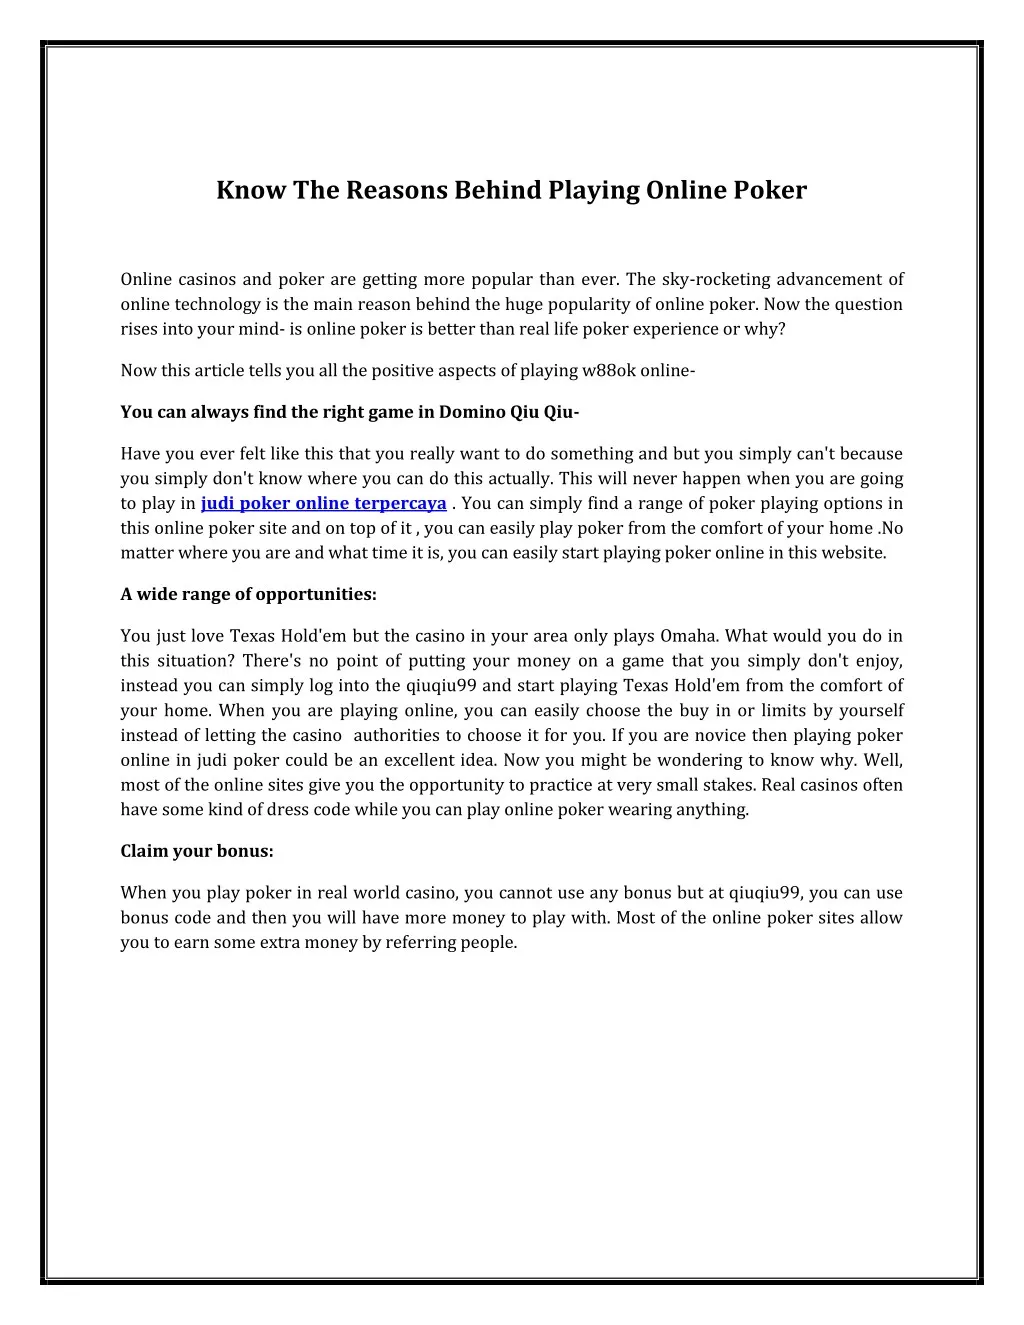 know the reasons behind playing online poker